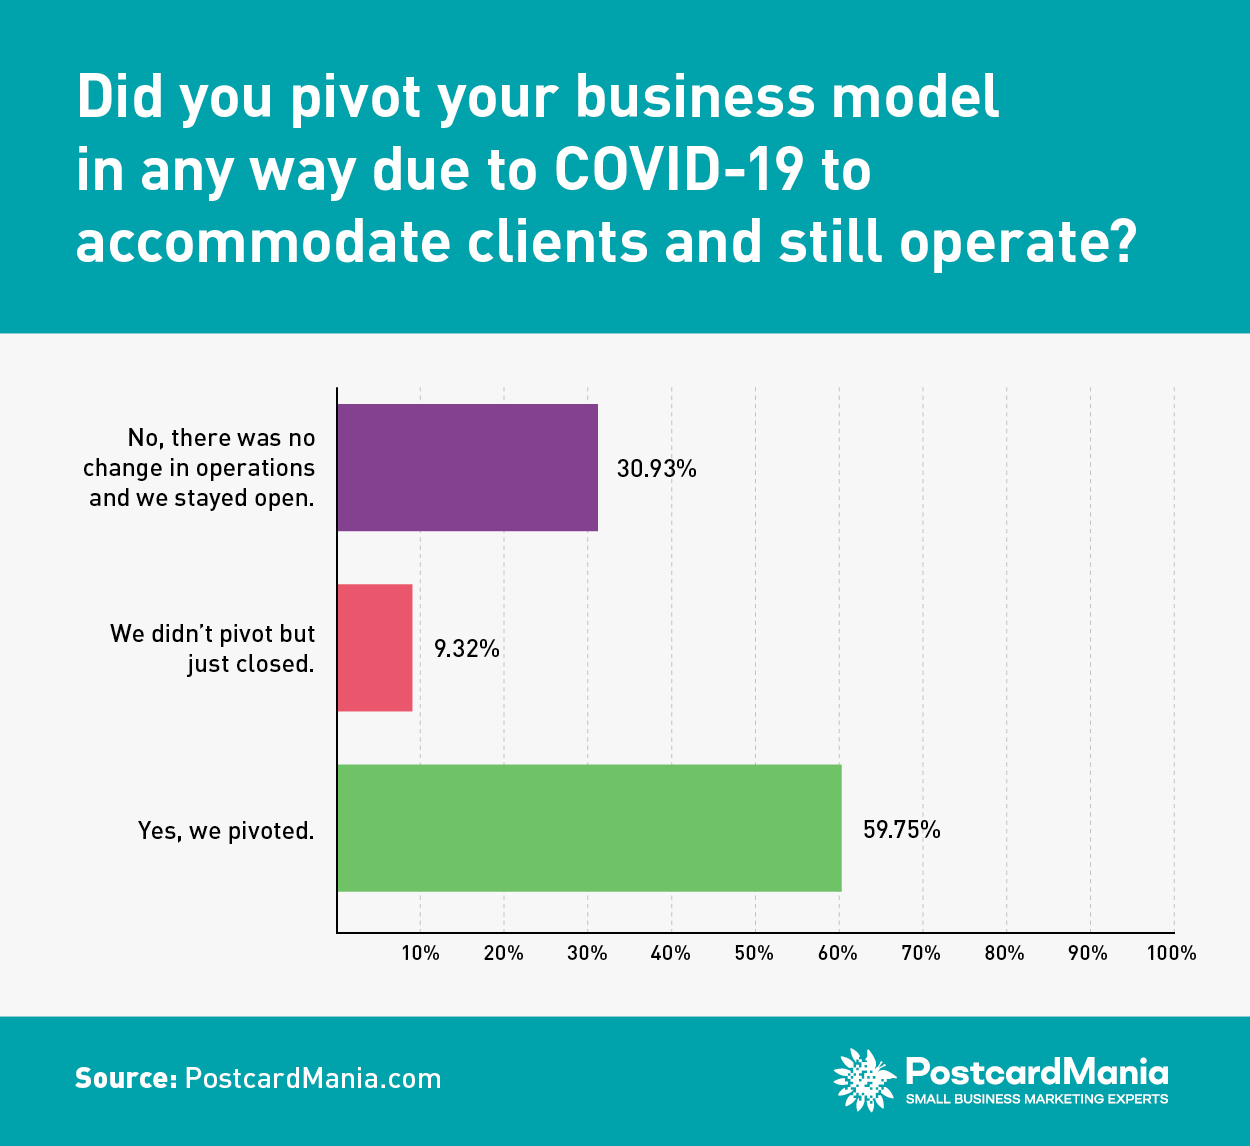 COVID Survey 3 - Did you pivot your business model in any way due to COVID-19 to accommodate clients and still operate?